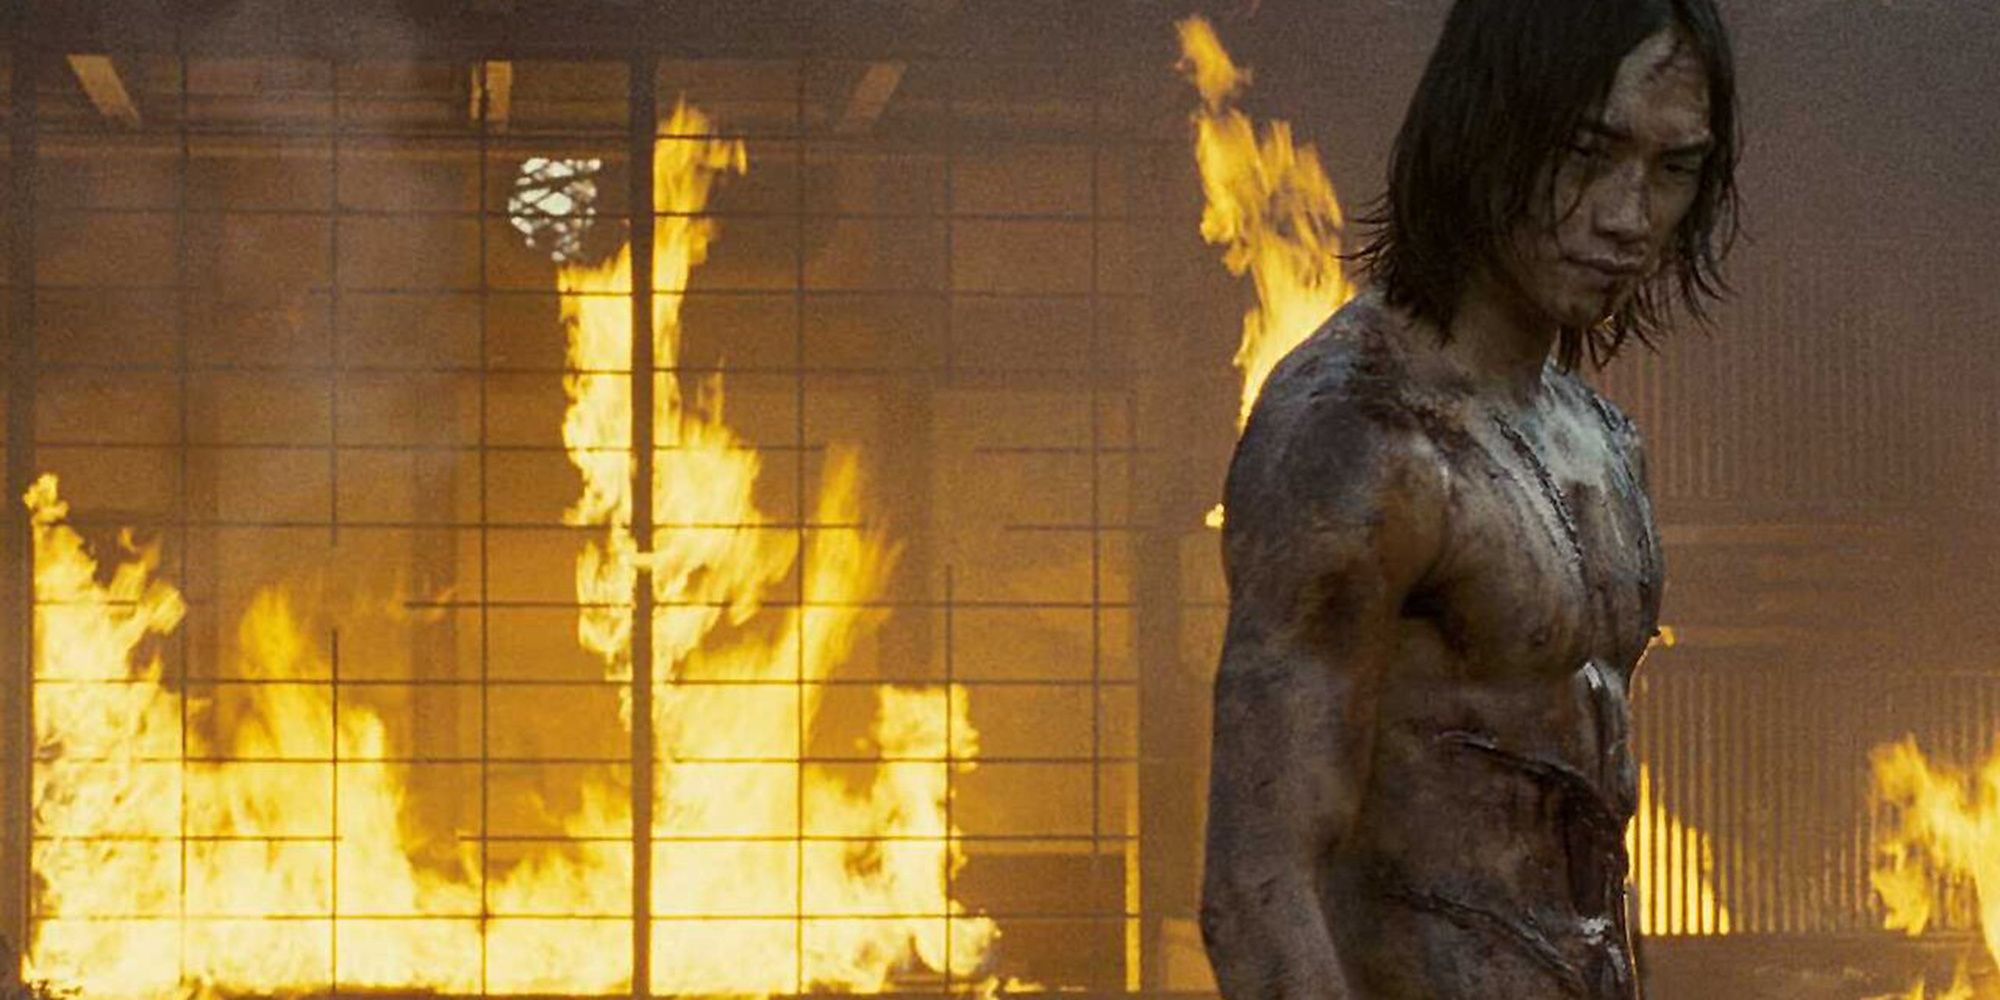 A shirtless and bloodied man standing in front of a burning building